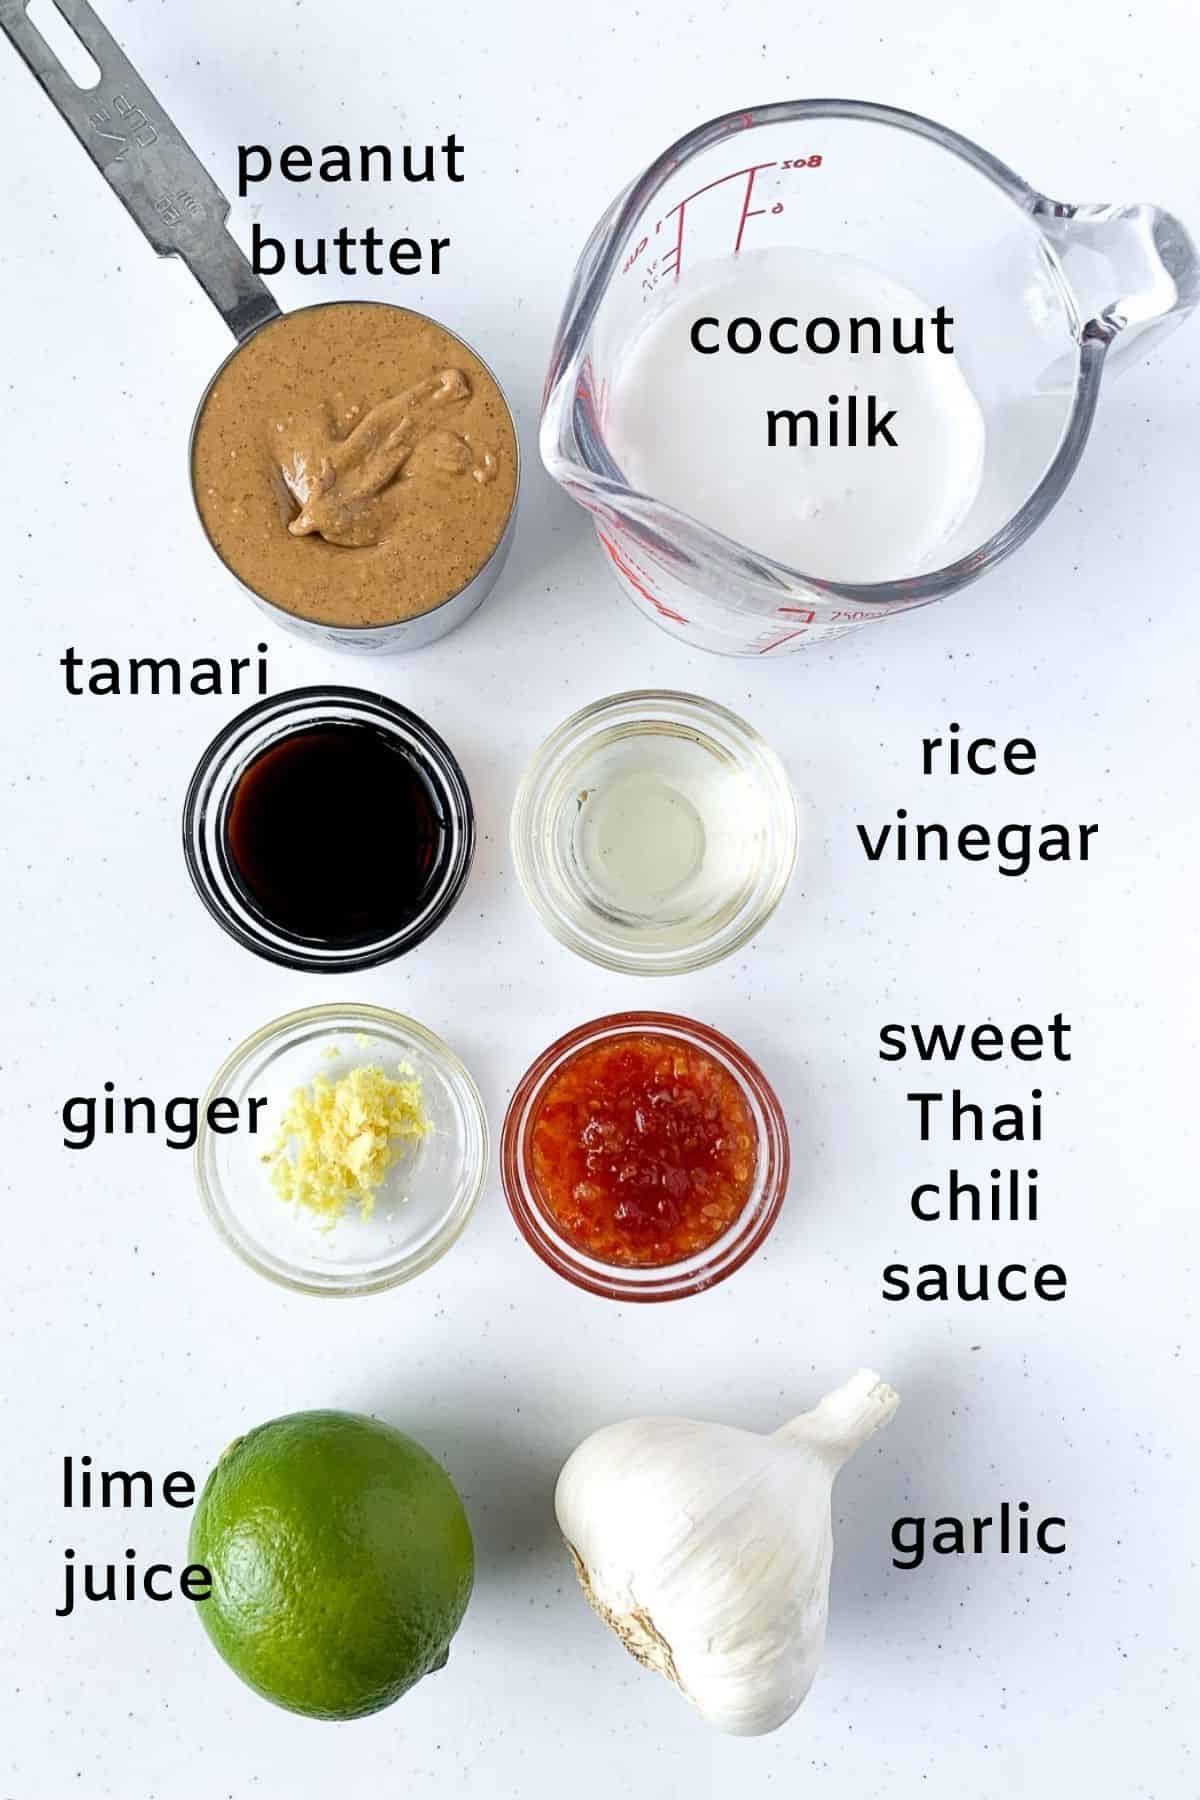 Labelled ingredients for peanut sauce with coconut milk